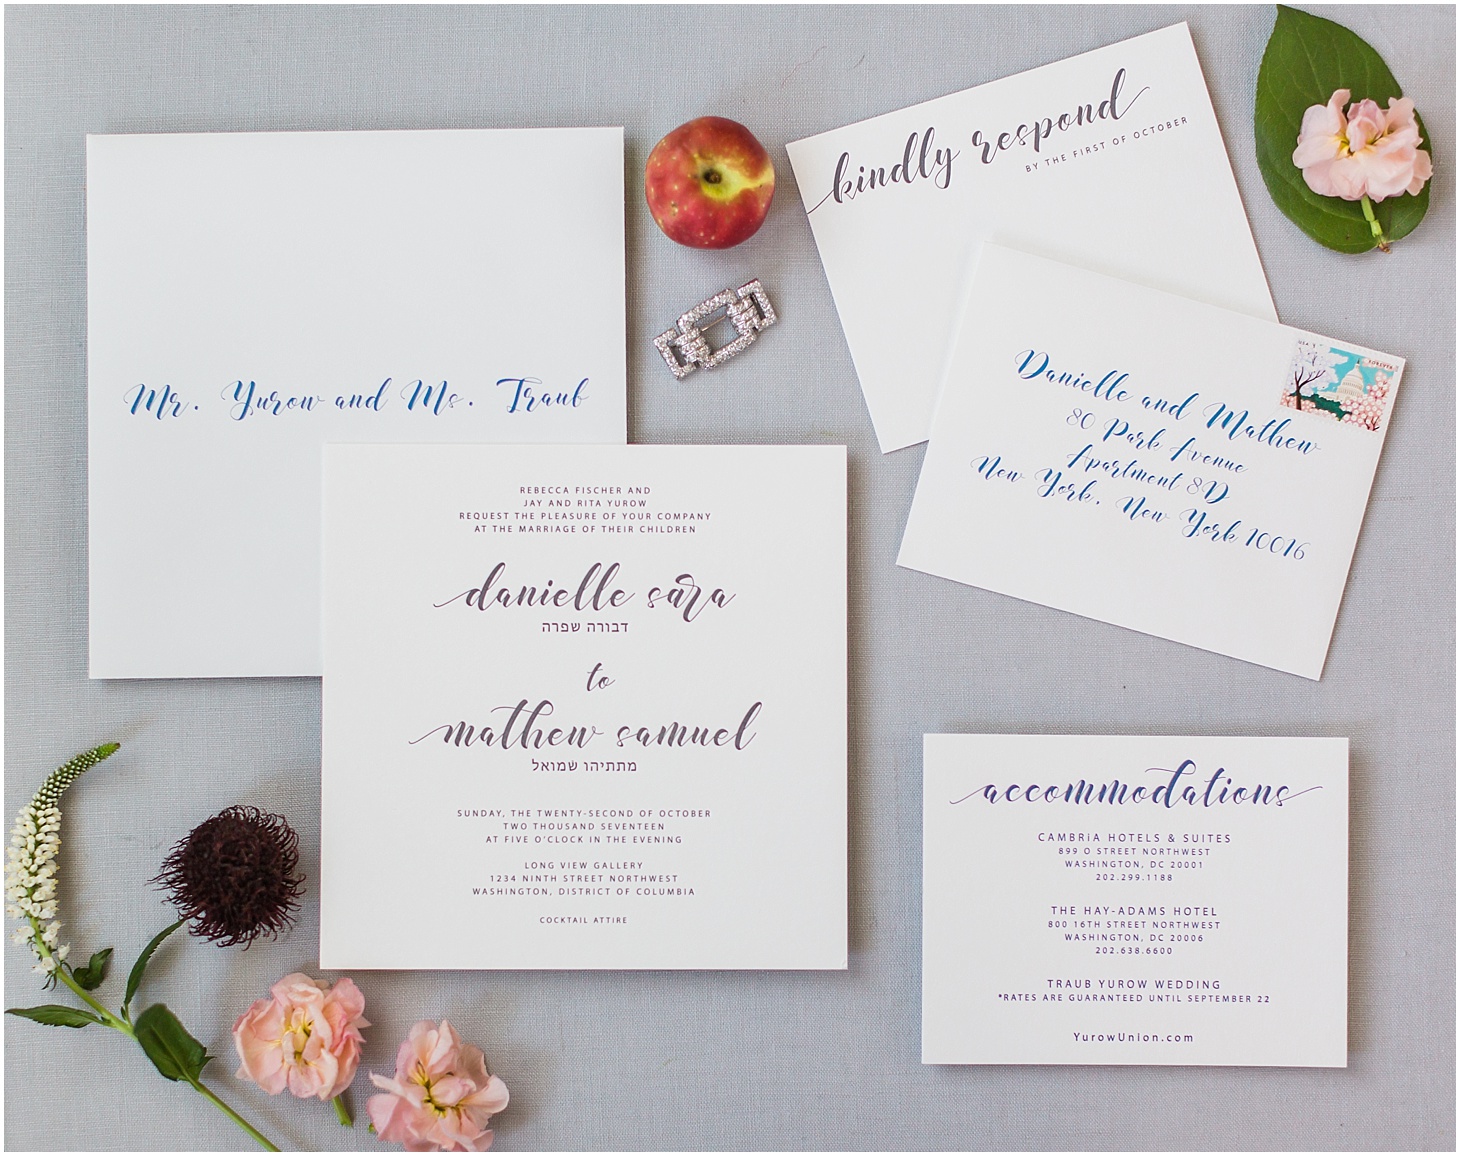 Put It On Paper Stationary Invitation Suite, Industrial-Chic Wedding at Long View Gallery in DC, Sarah Bradshaw Photography, DC Wedding Photographer